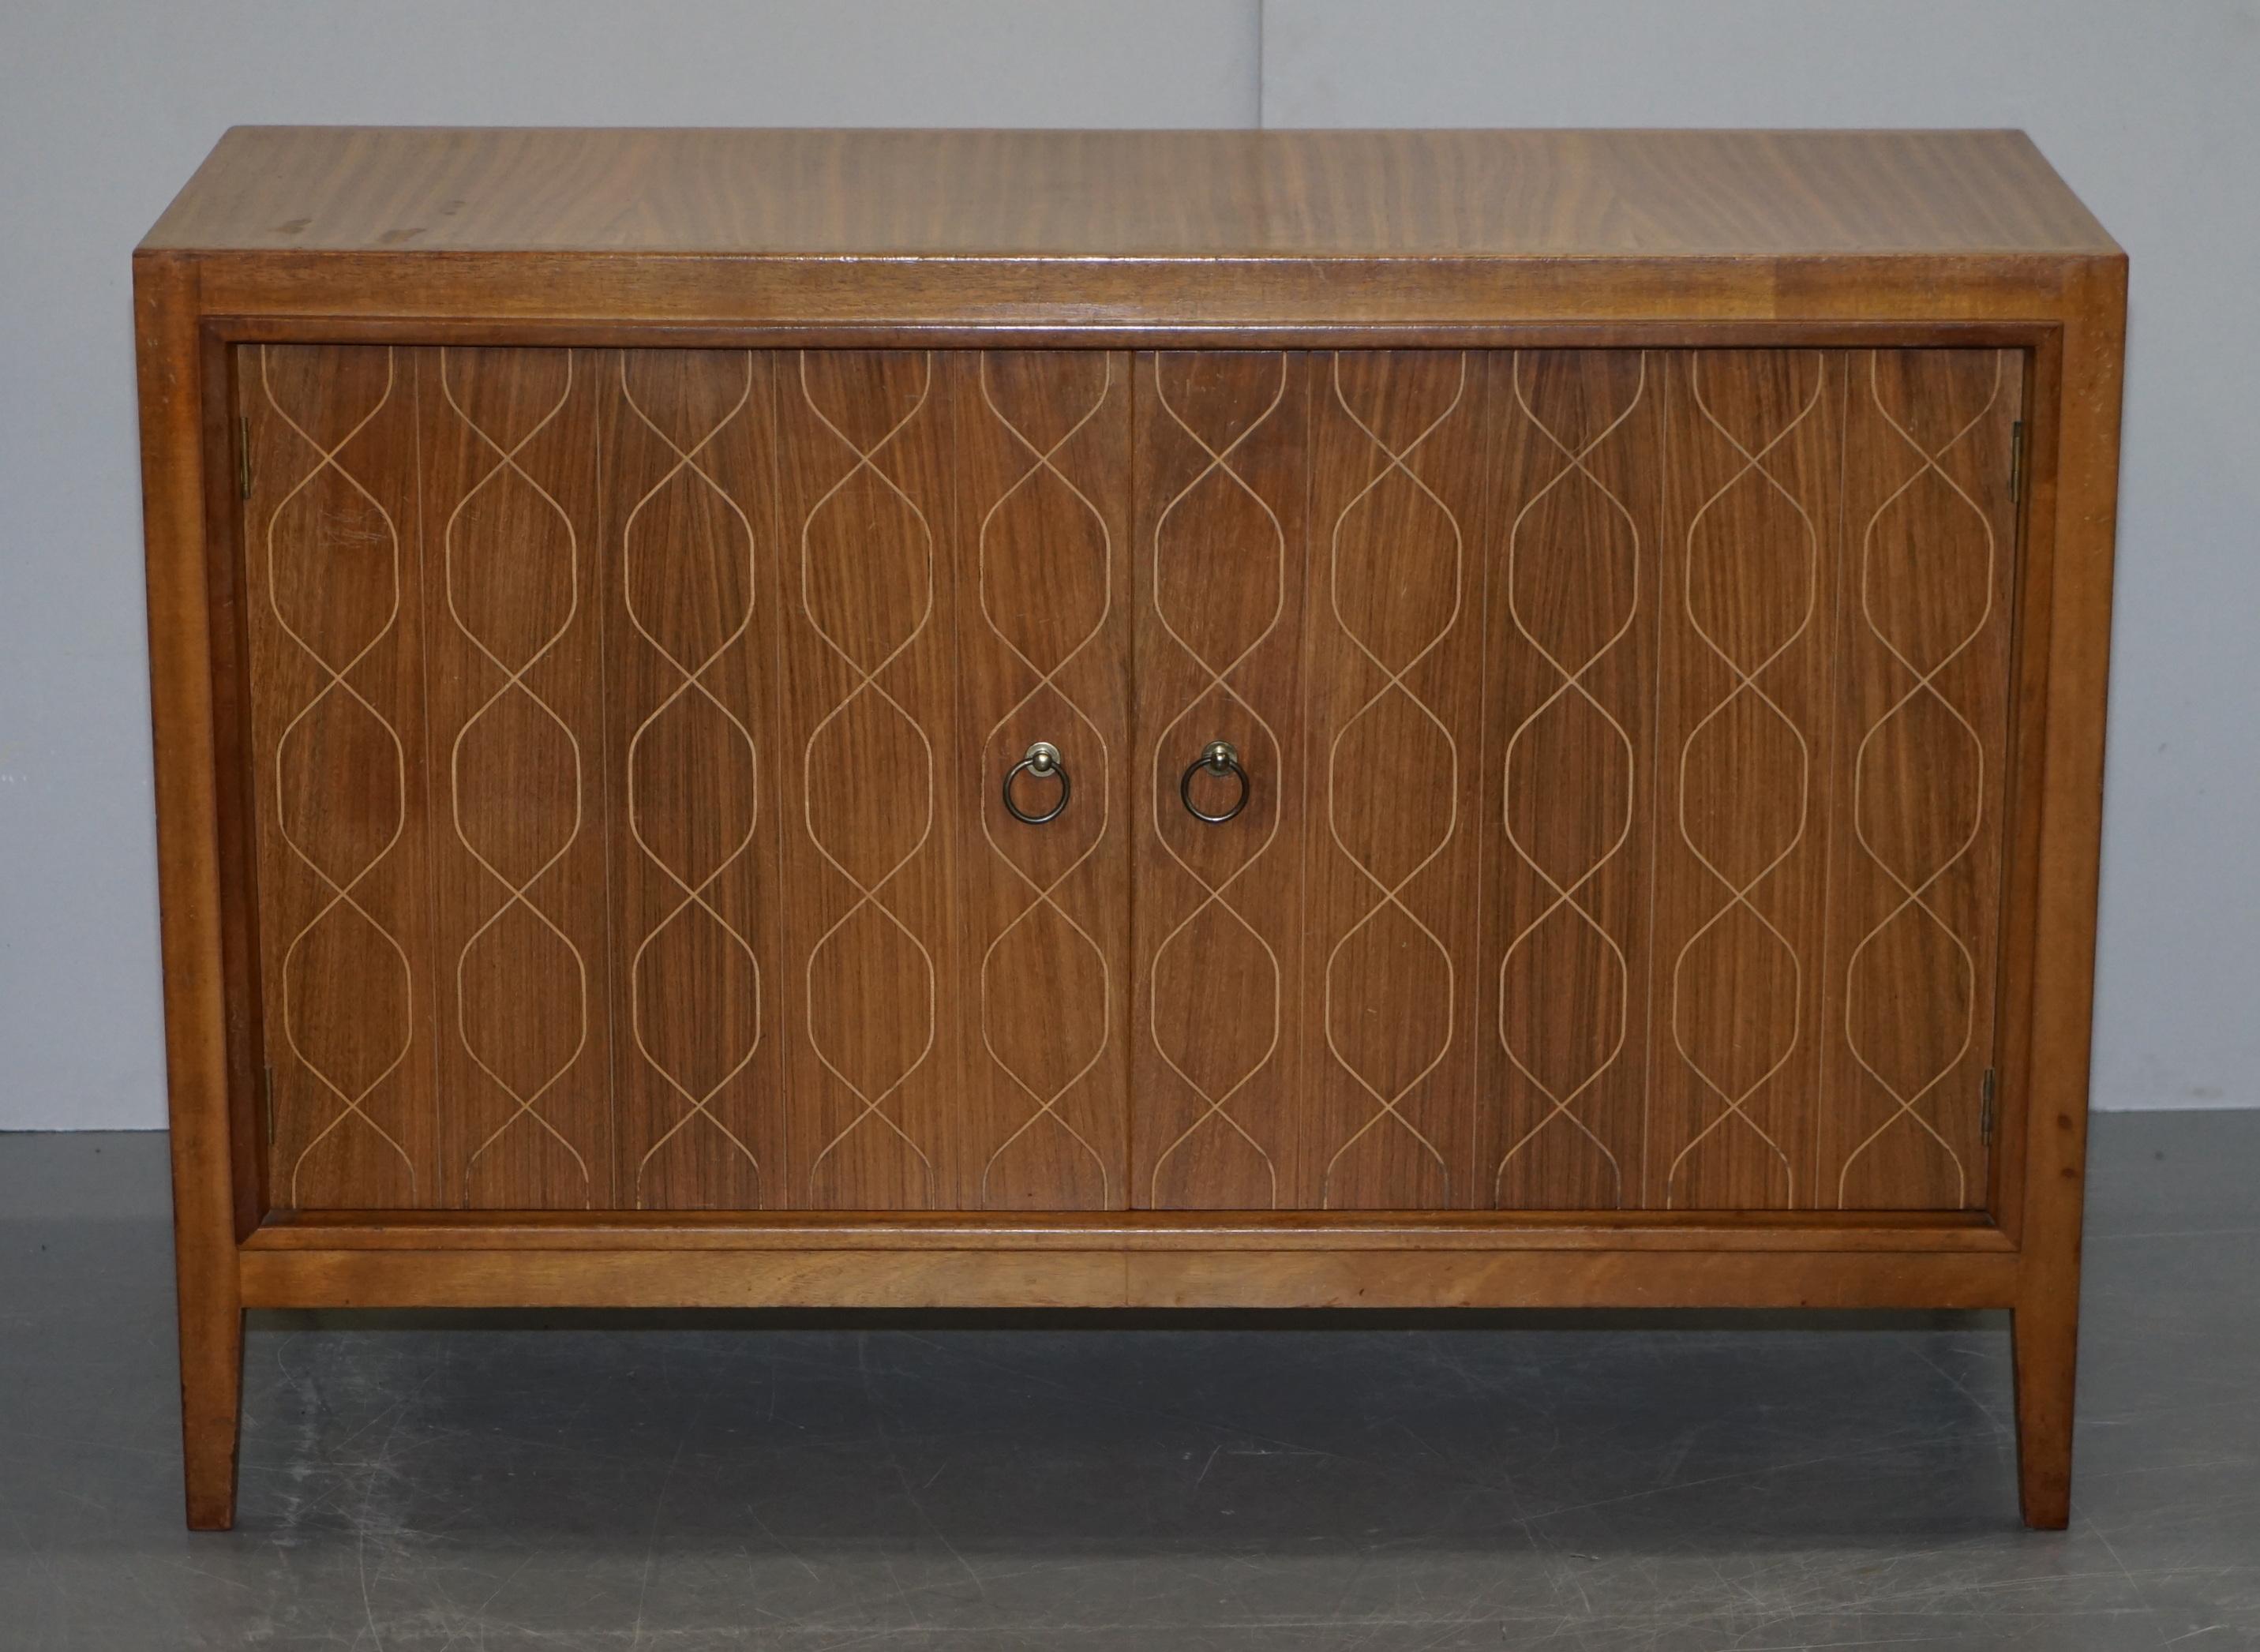 We are delighted to offer for sale this lovely 1951 Exhibited Gordon Russel double helix sideboard 

This wonderful Gordon Russell of Broadway double helix sideboard, model number 407, was designed by David Booth and Judith Ledeboer for the